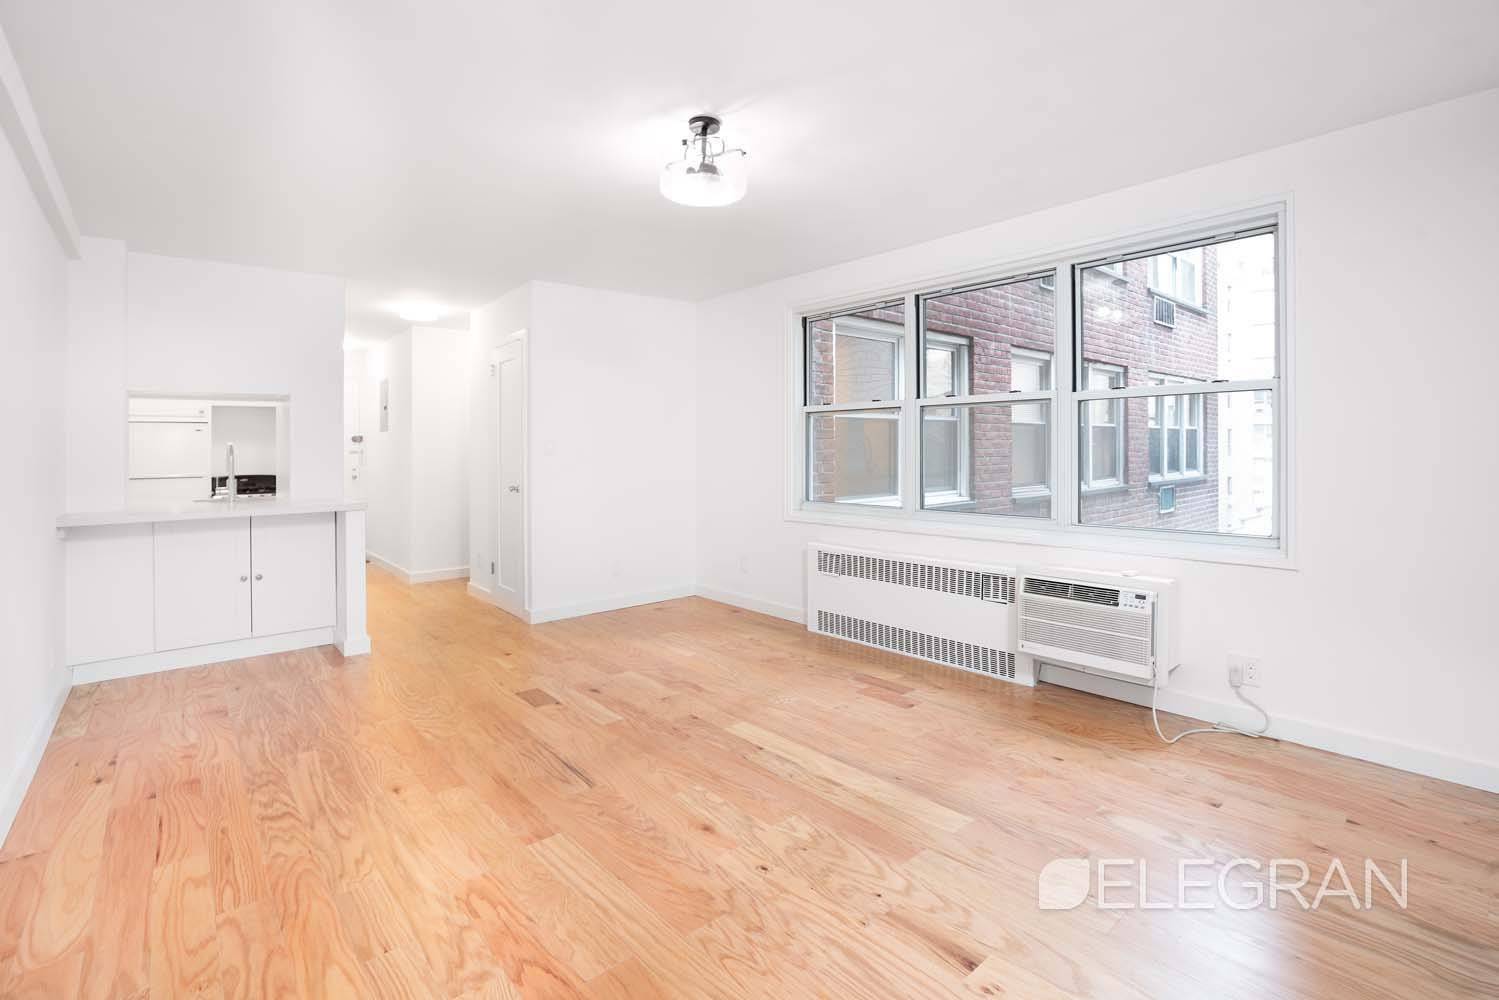 Newly renovated huge one bedroom condo apartment in the heart of midtown, close to all transportation.